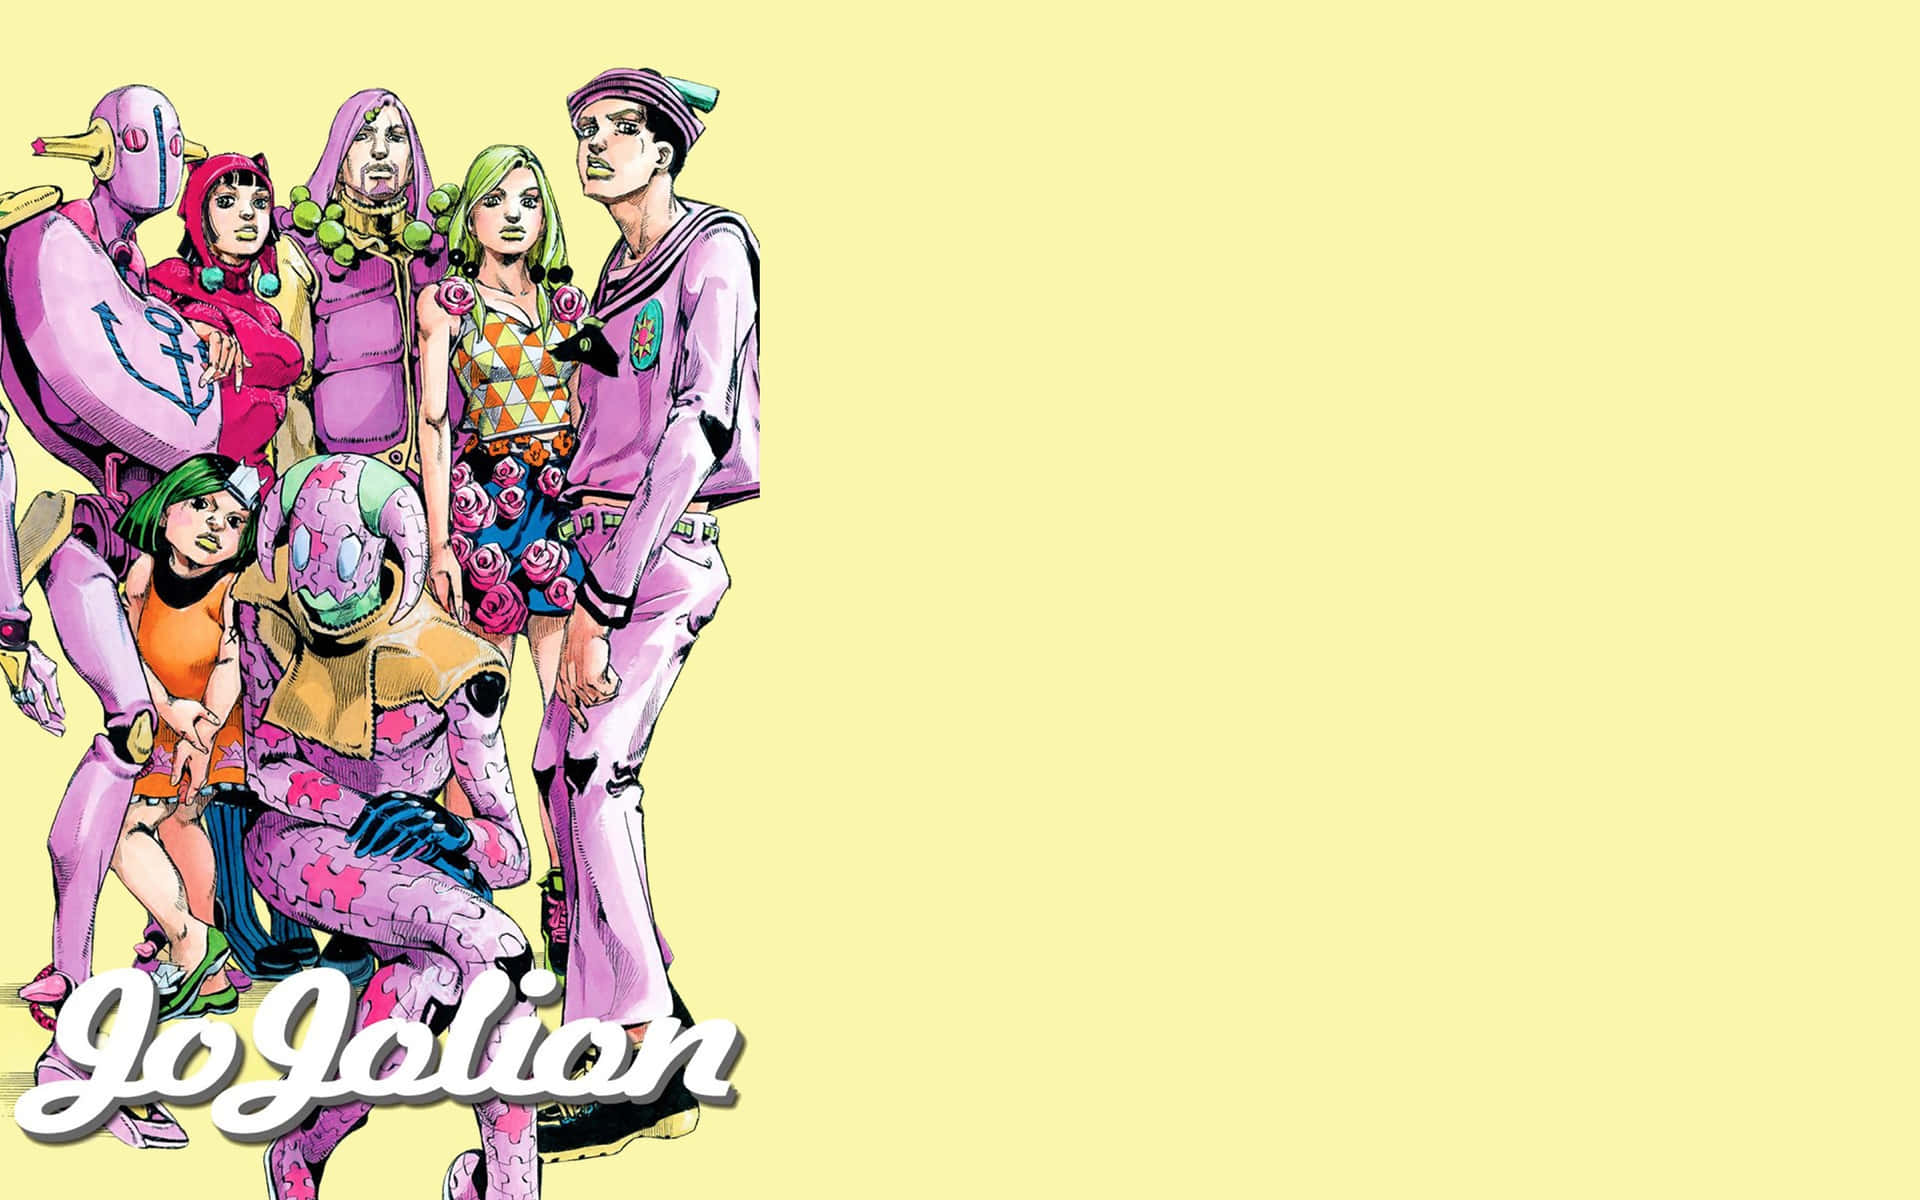 JoJolion Characters in Mysterious World Wallpaper